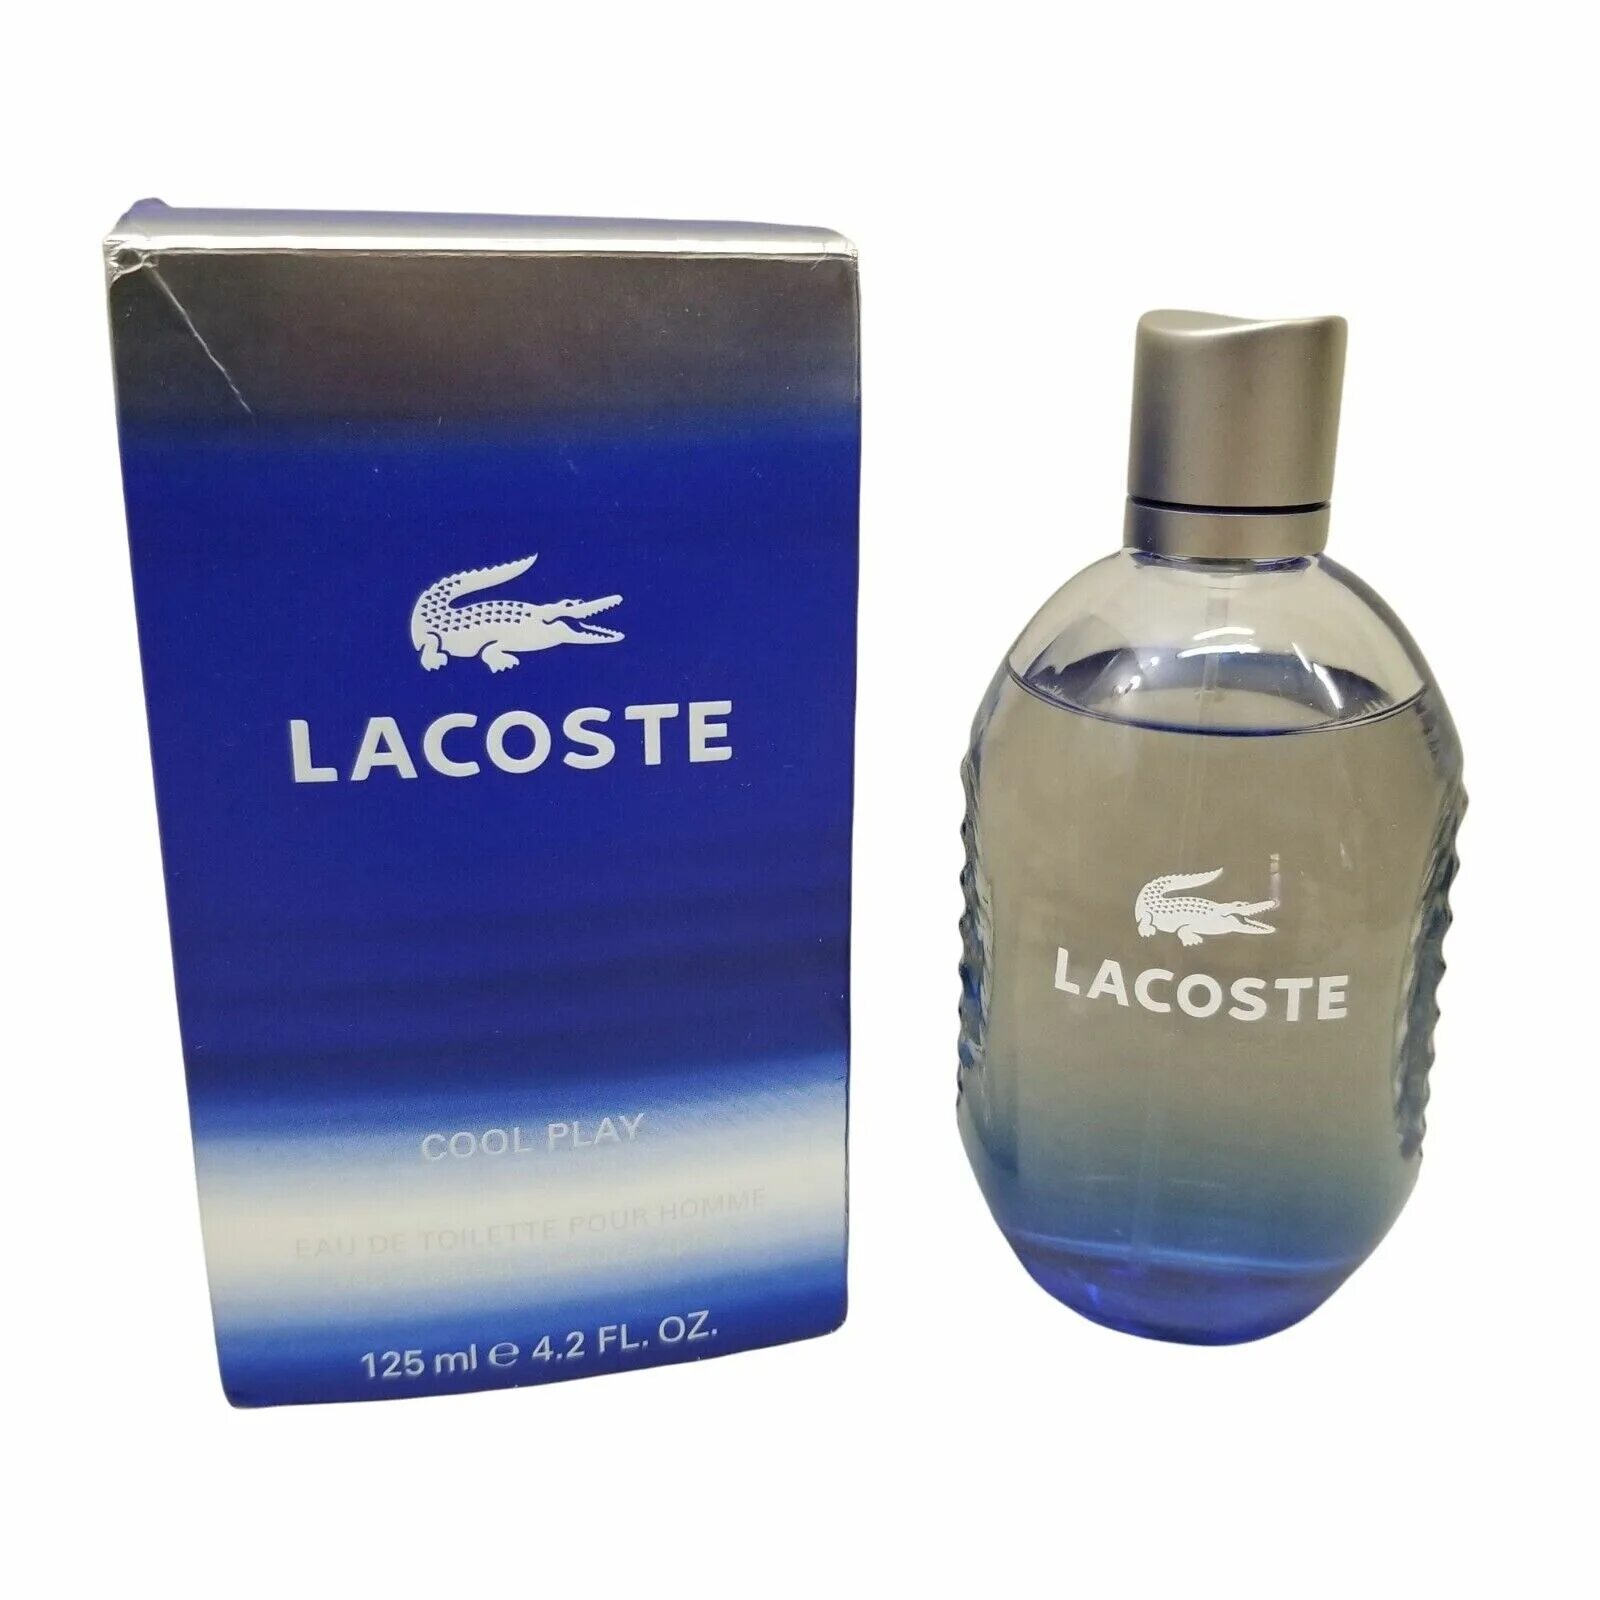 Lacoste cool Play 125 ml. Лакоста кул плей 125 мл. L-002 Style in Play Lacoste. Lacoste cool Play летуаль. Lacoste natural